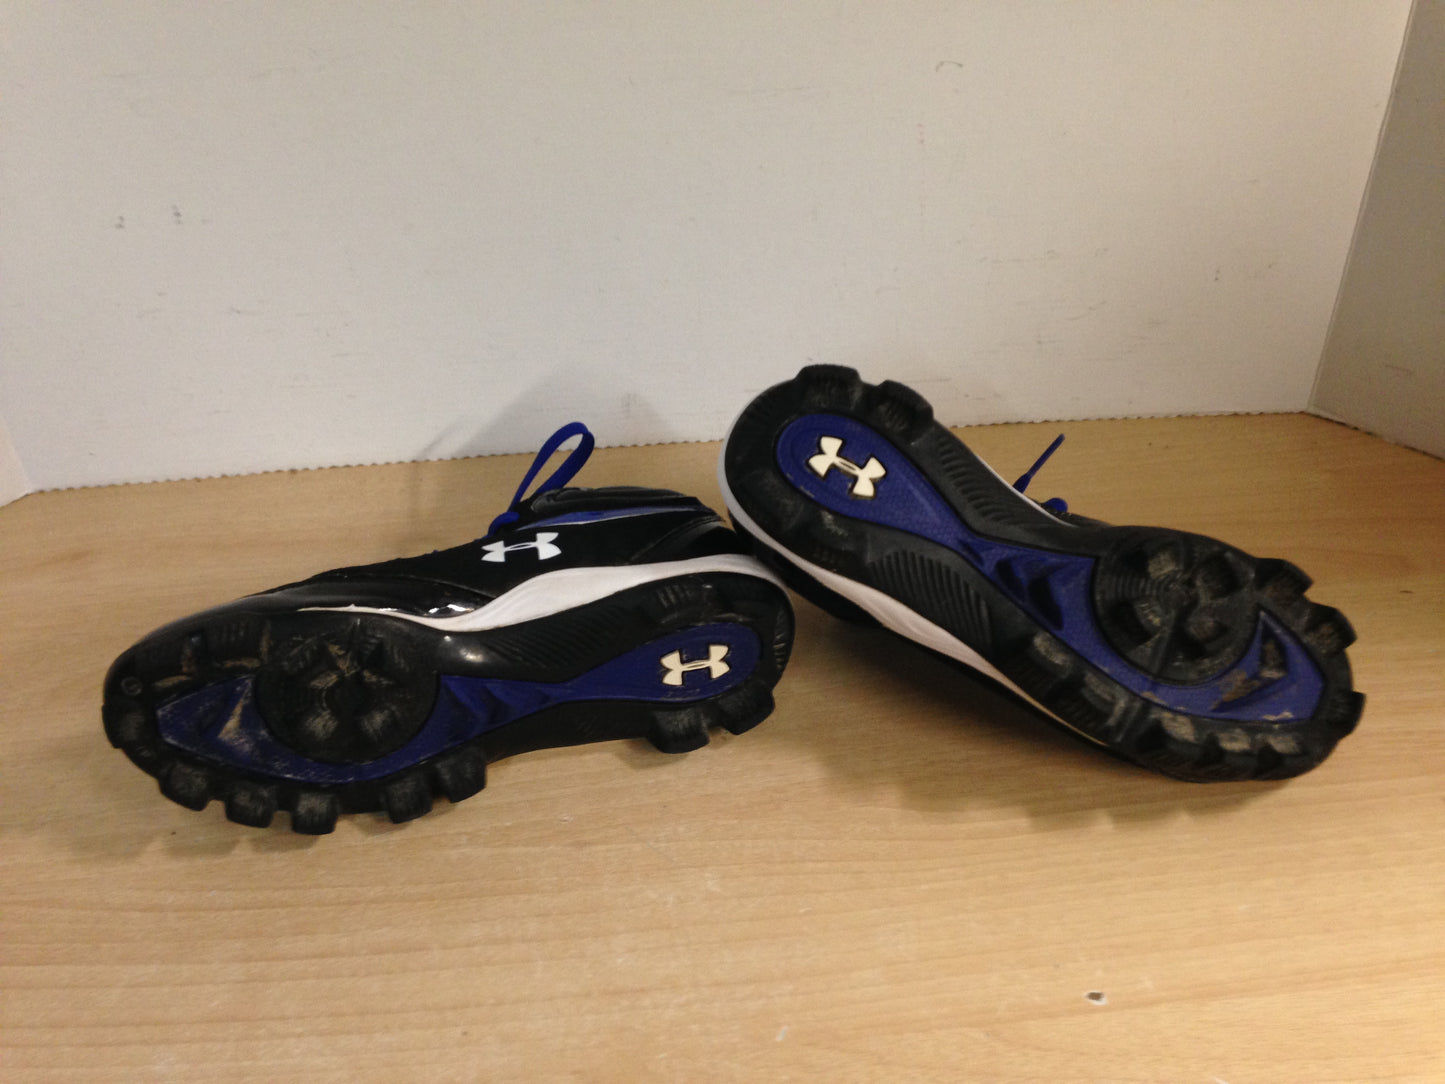 Baseball Shoes Cleats Child Size 2.5 Under Armour Blue Black